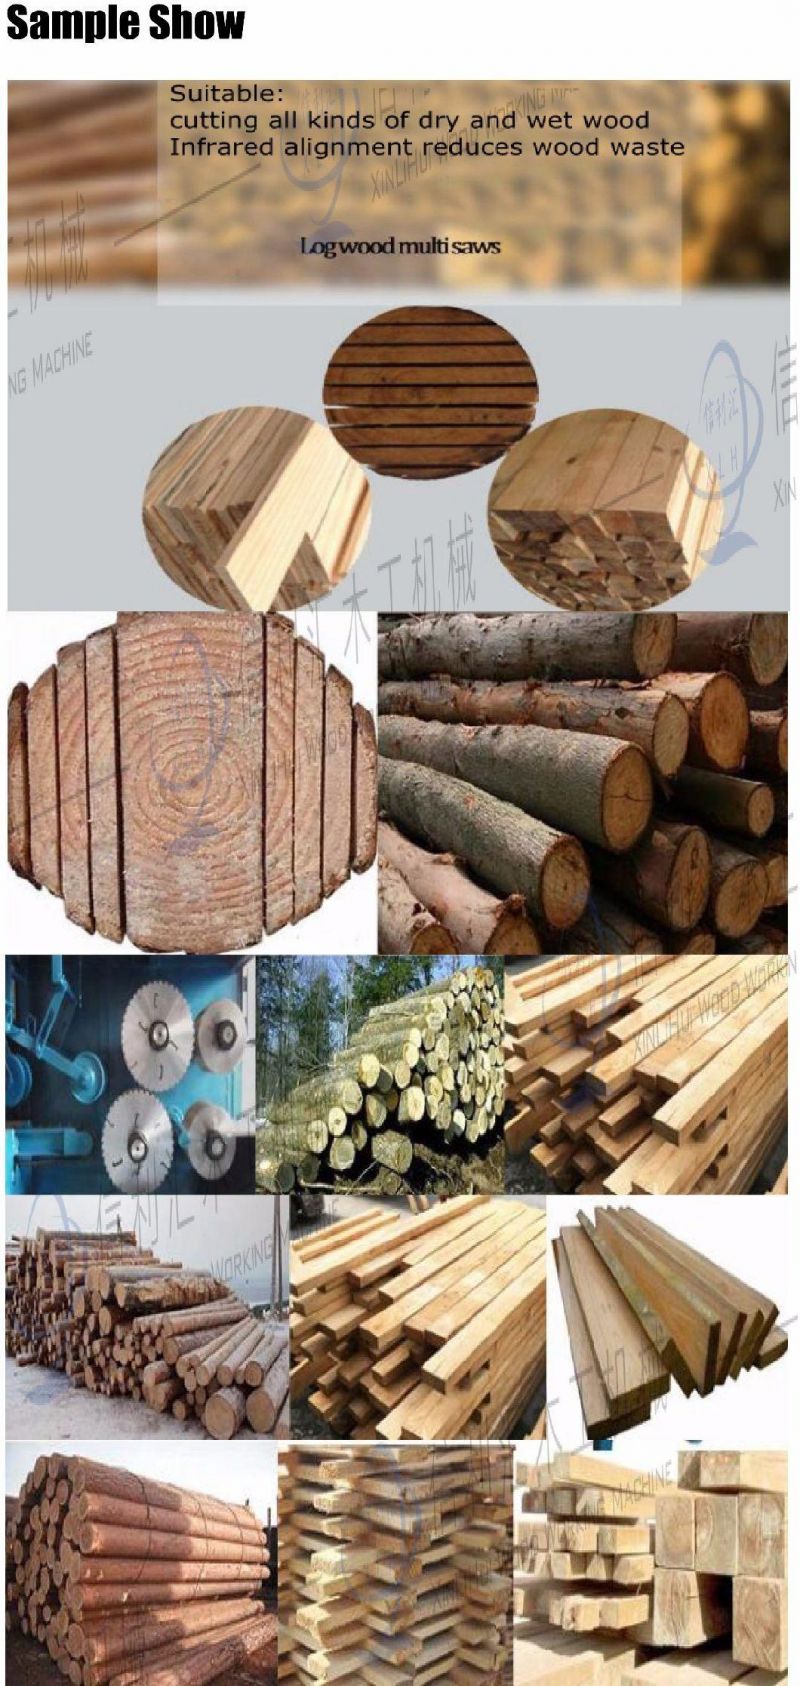 Multipurpose Saw Mill Industry, Mutlipurpose Saw Mill Machine, Different Size Timber Maker Saw Mill Machine, Saw Mill Machine